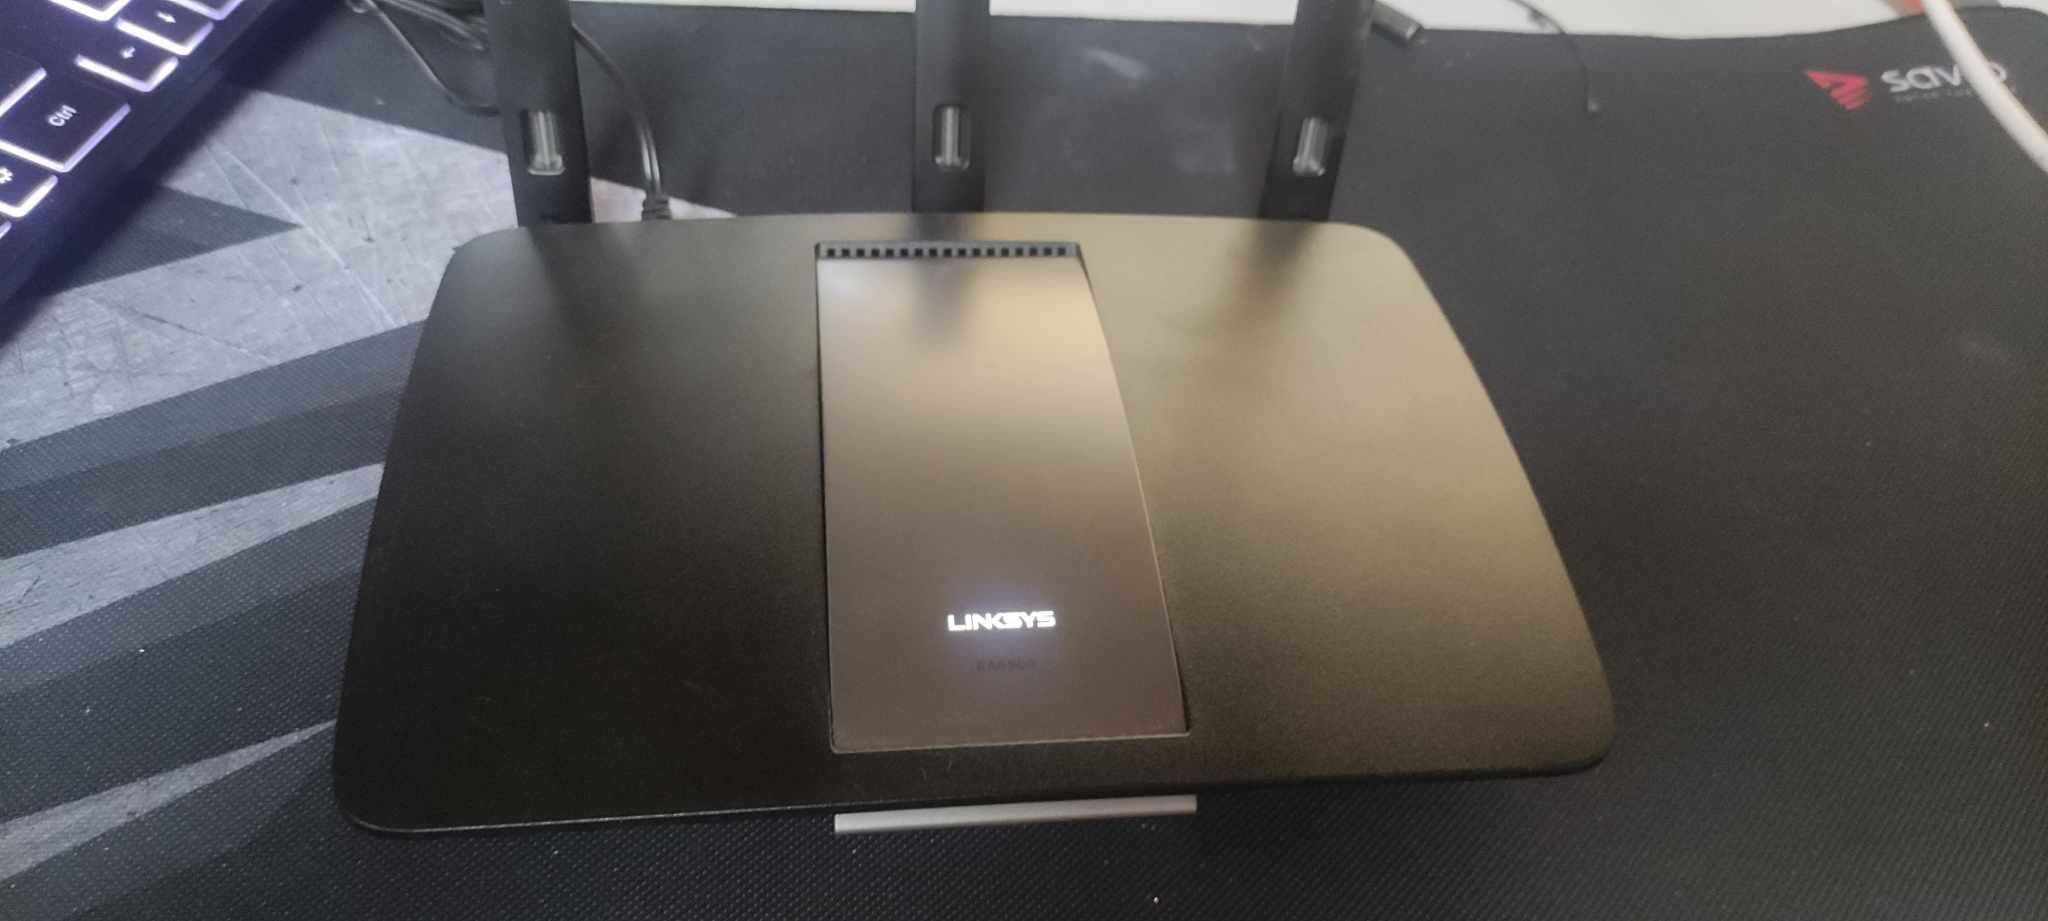 Router WIFI Linksys EA6900 2,4 + 5GHz SMART ANDROID APP